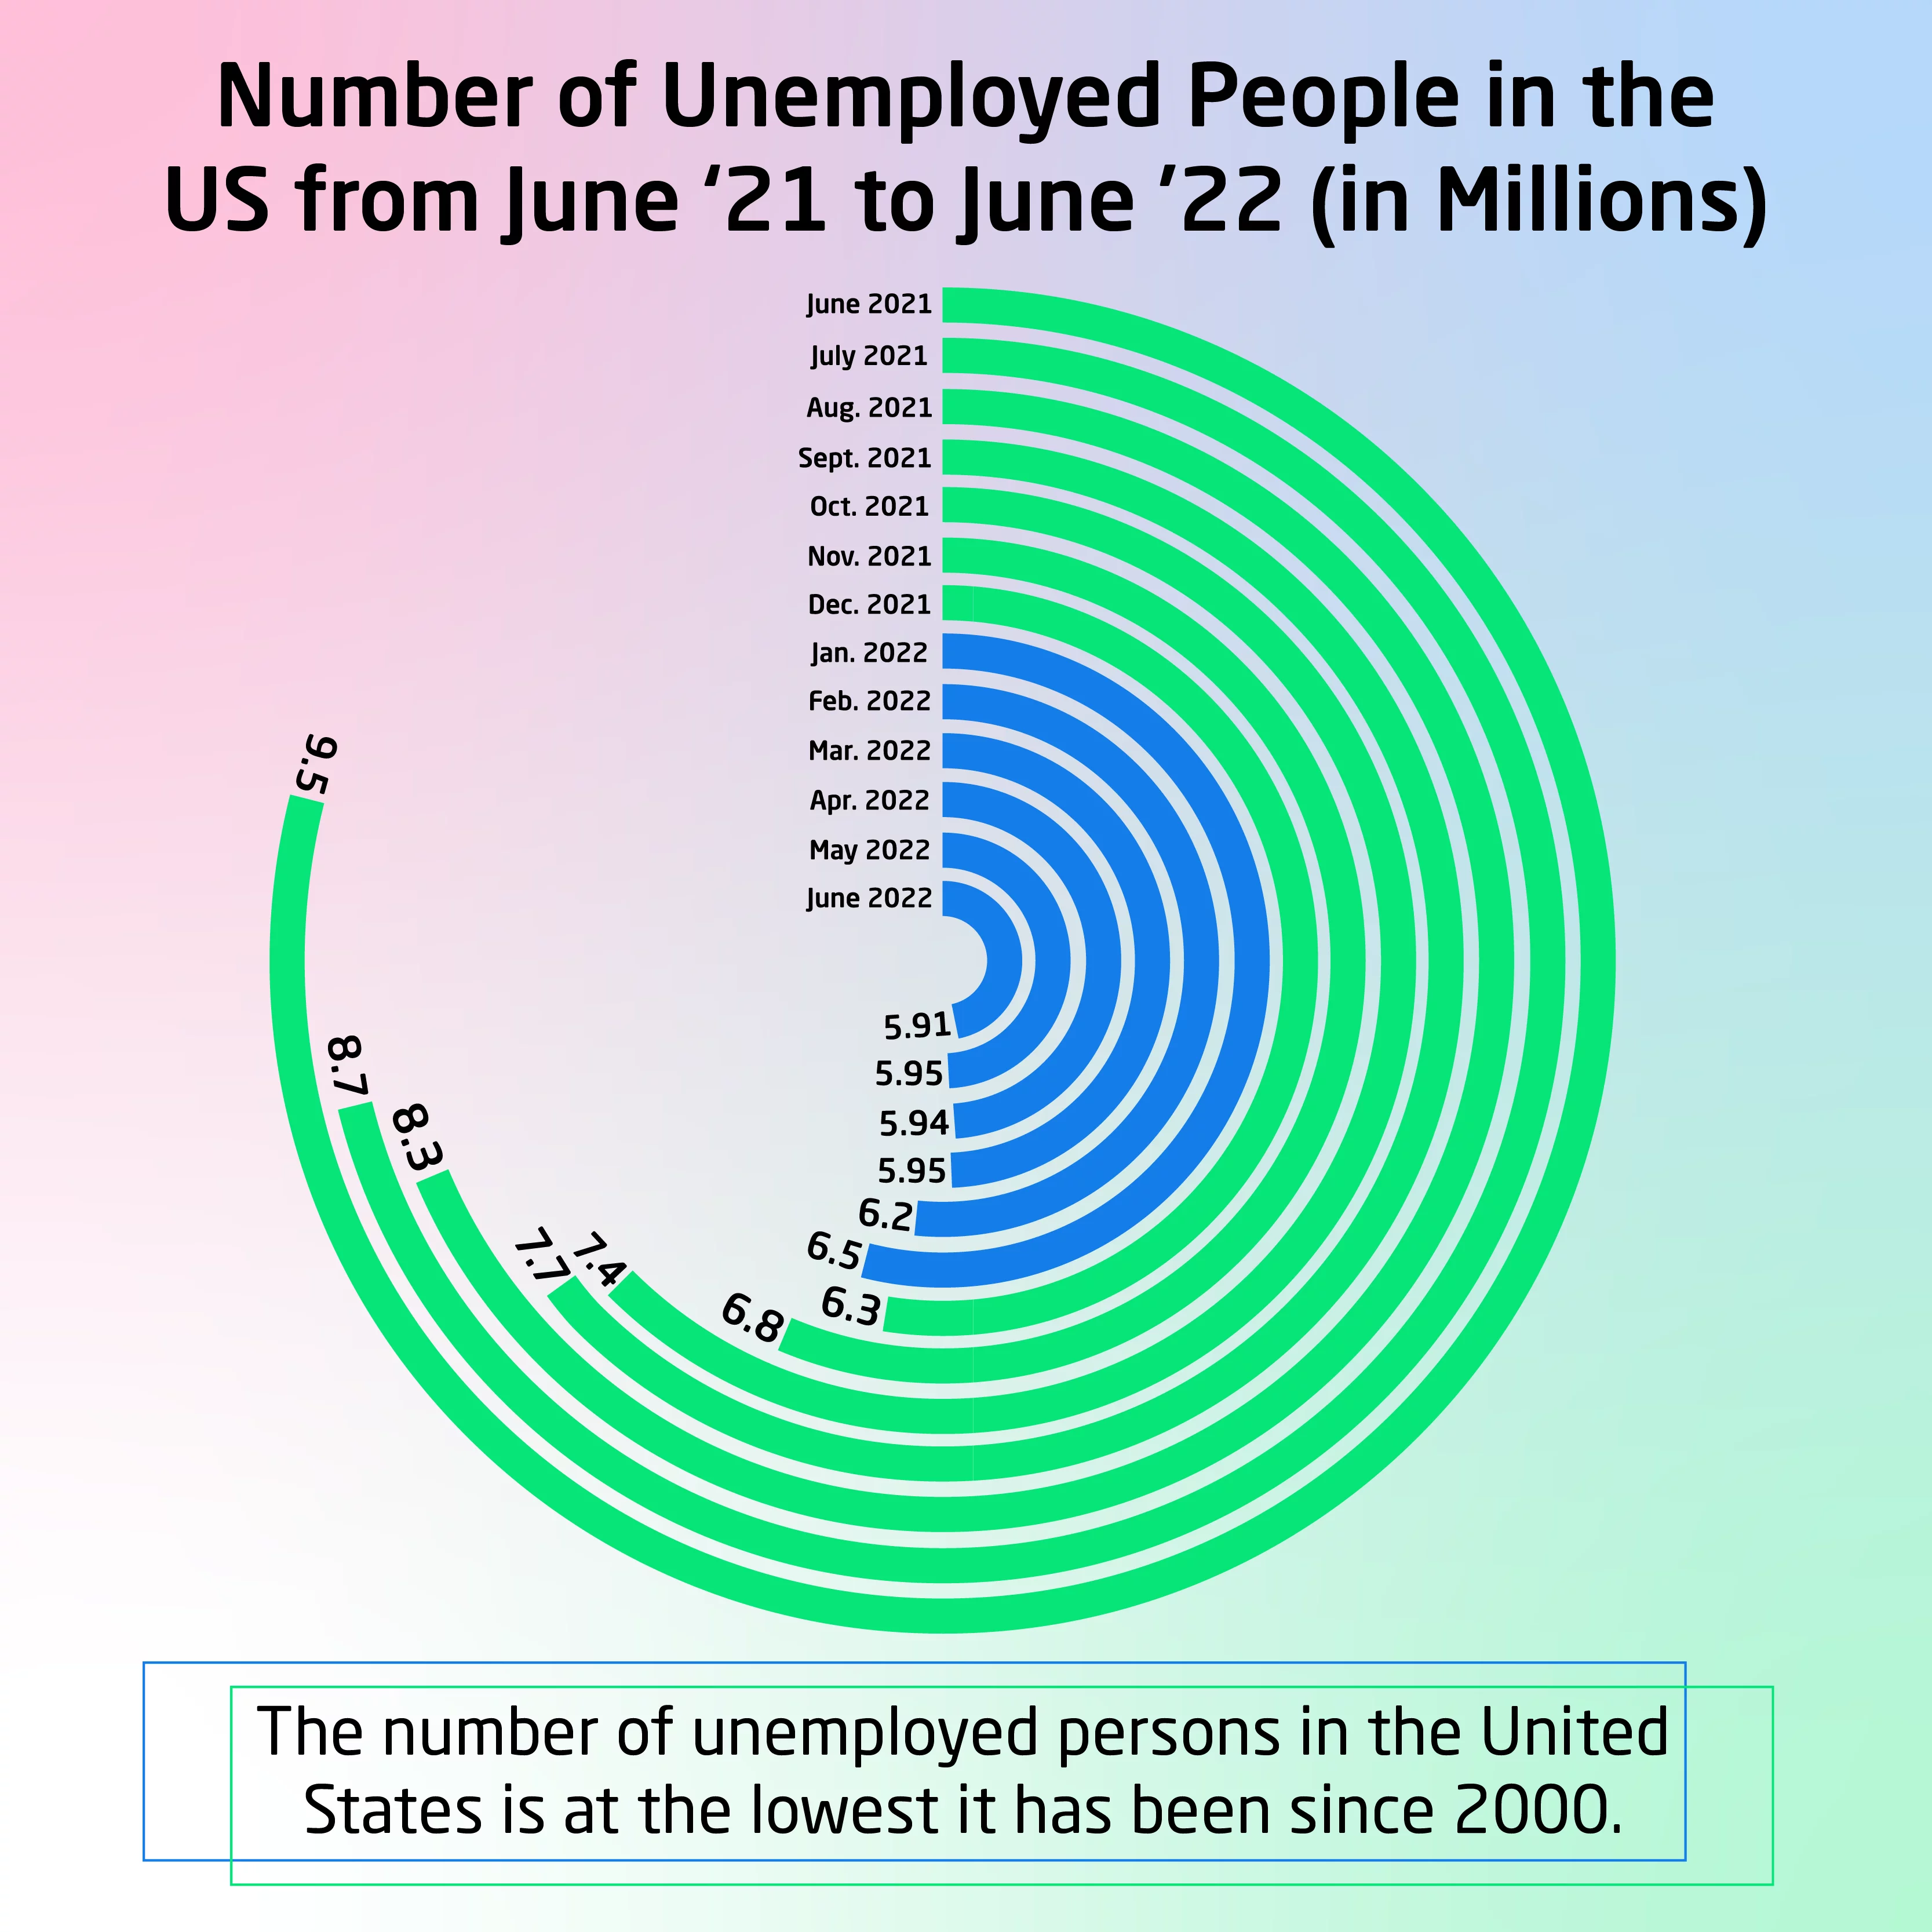 Infographic showing the number of unemployed people in the US from June 2021 to June 2022